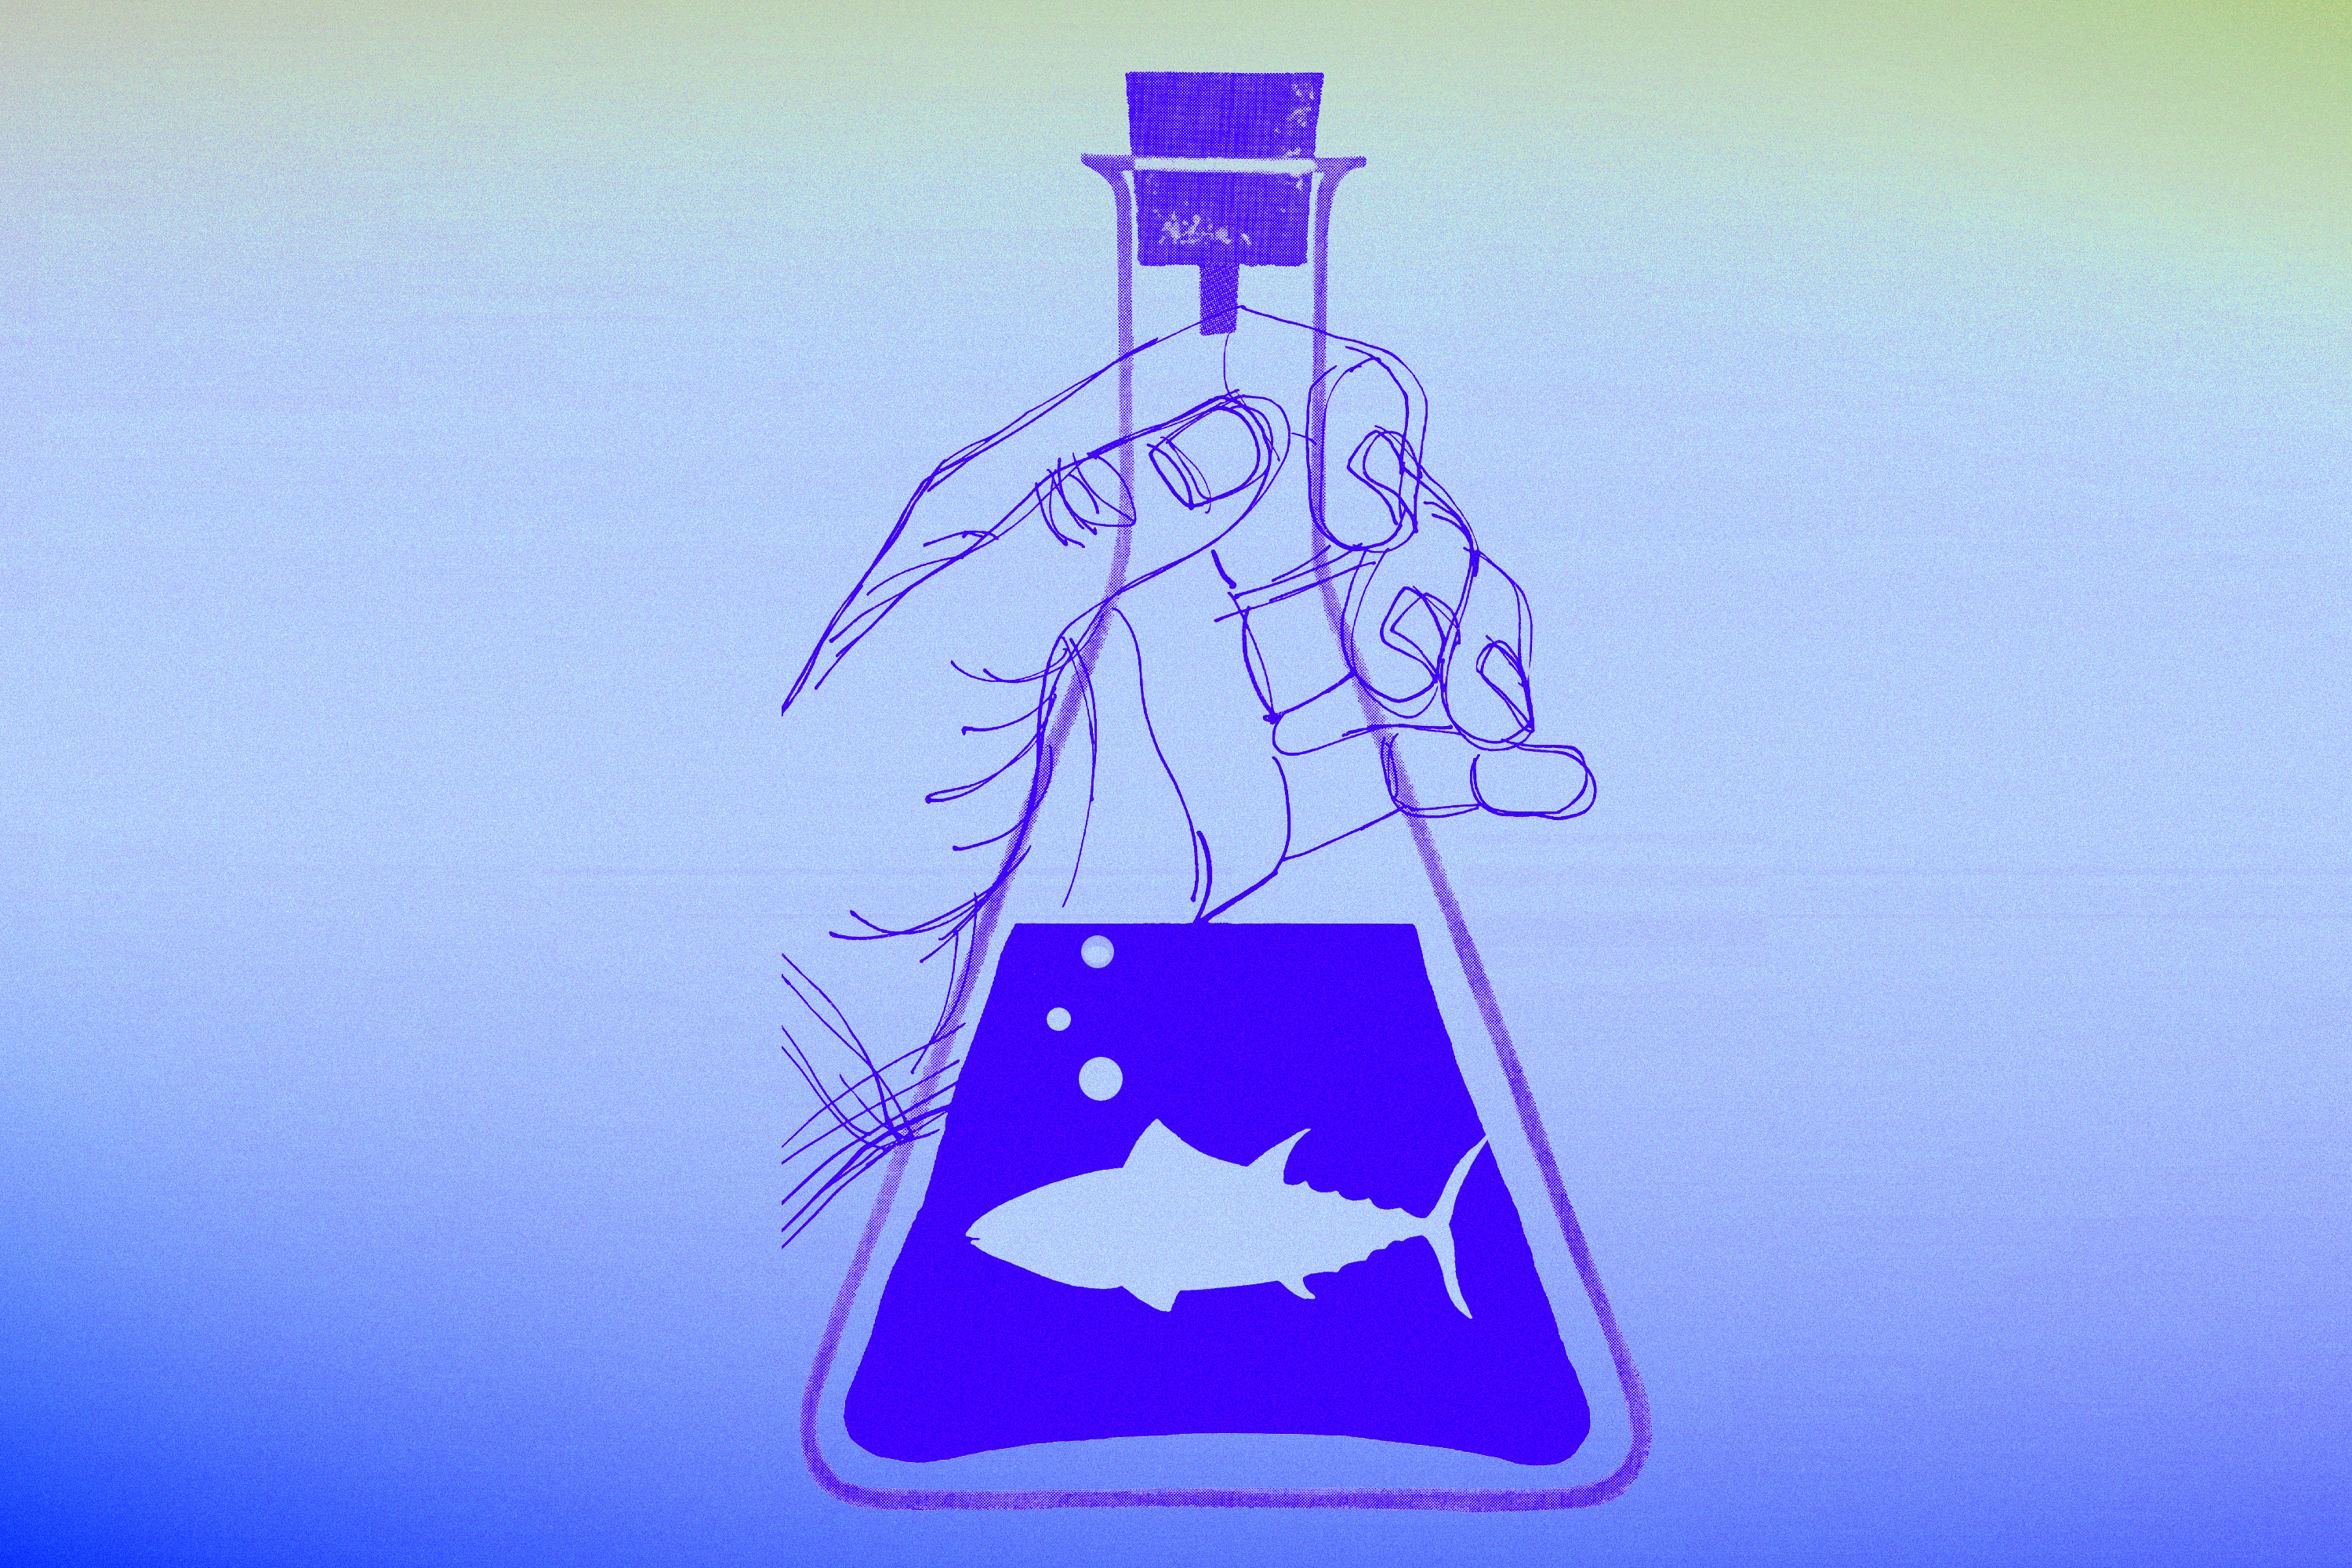 An illustration of a hand holding a beaker with the silhouette of a fish inside.